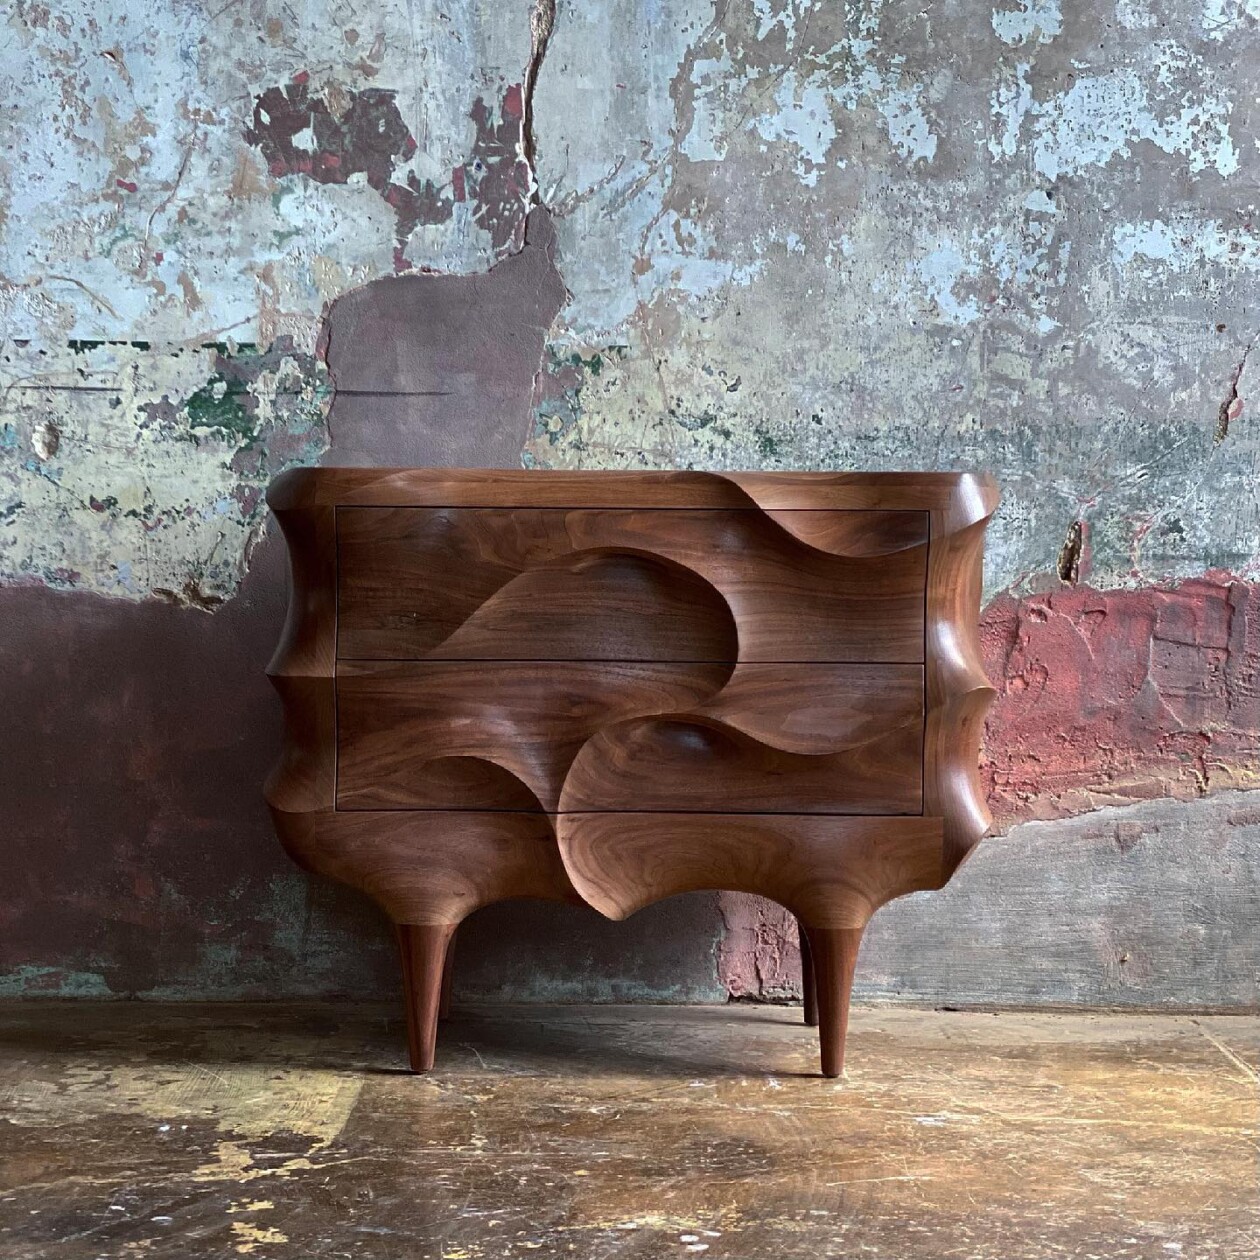 Intricately Engraved And Textured Organic Shaped Furniture By Caleb Woodard (2)